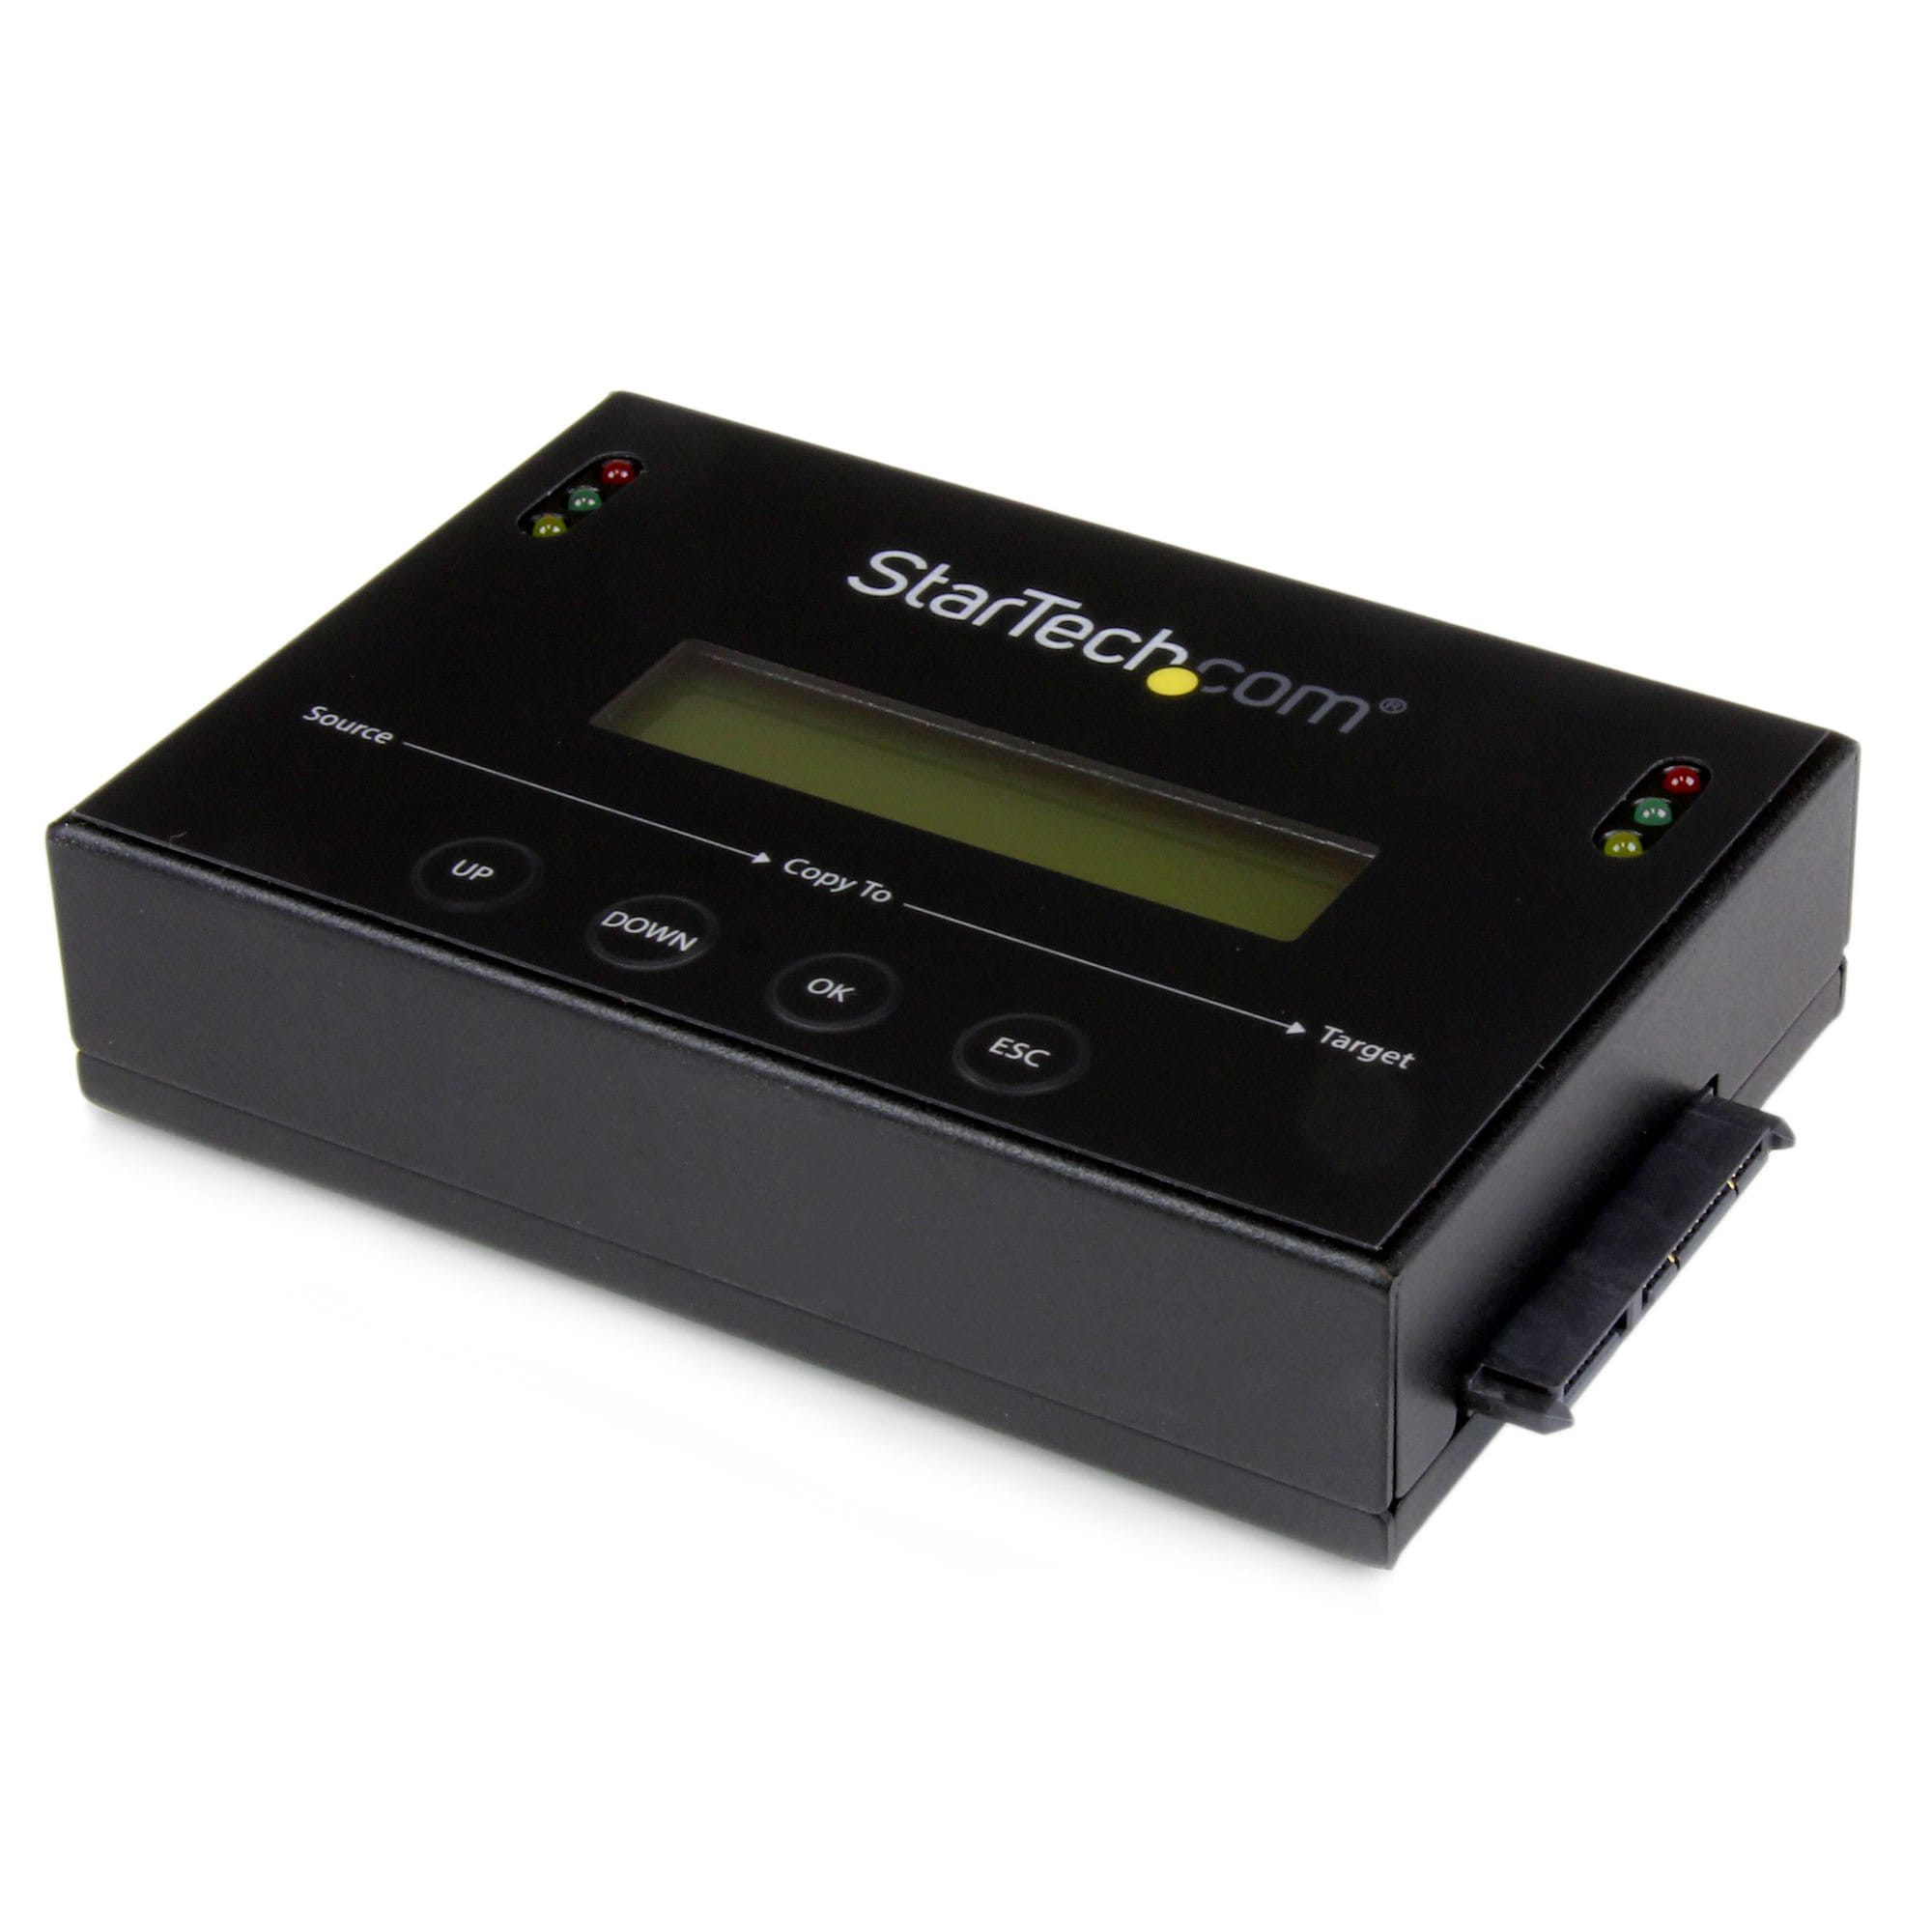 StarTech.com 11 Standalone Hard Drive Duplicator with Disk Image Library Manager For Backup & Restore, Store Several Images on one 2.53.5 SATA Drive, HDDSSD Cloner, No PC Required - TAA Compliant - Festplattenduplikator - 2 Schächte (SATA-600)